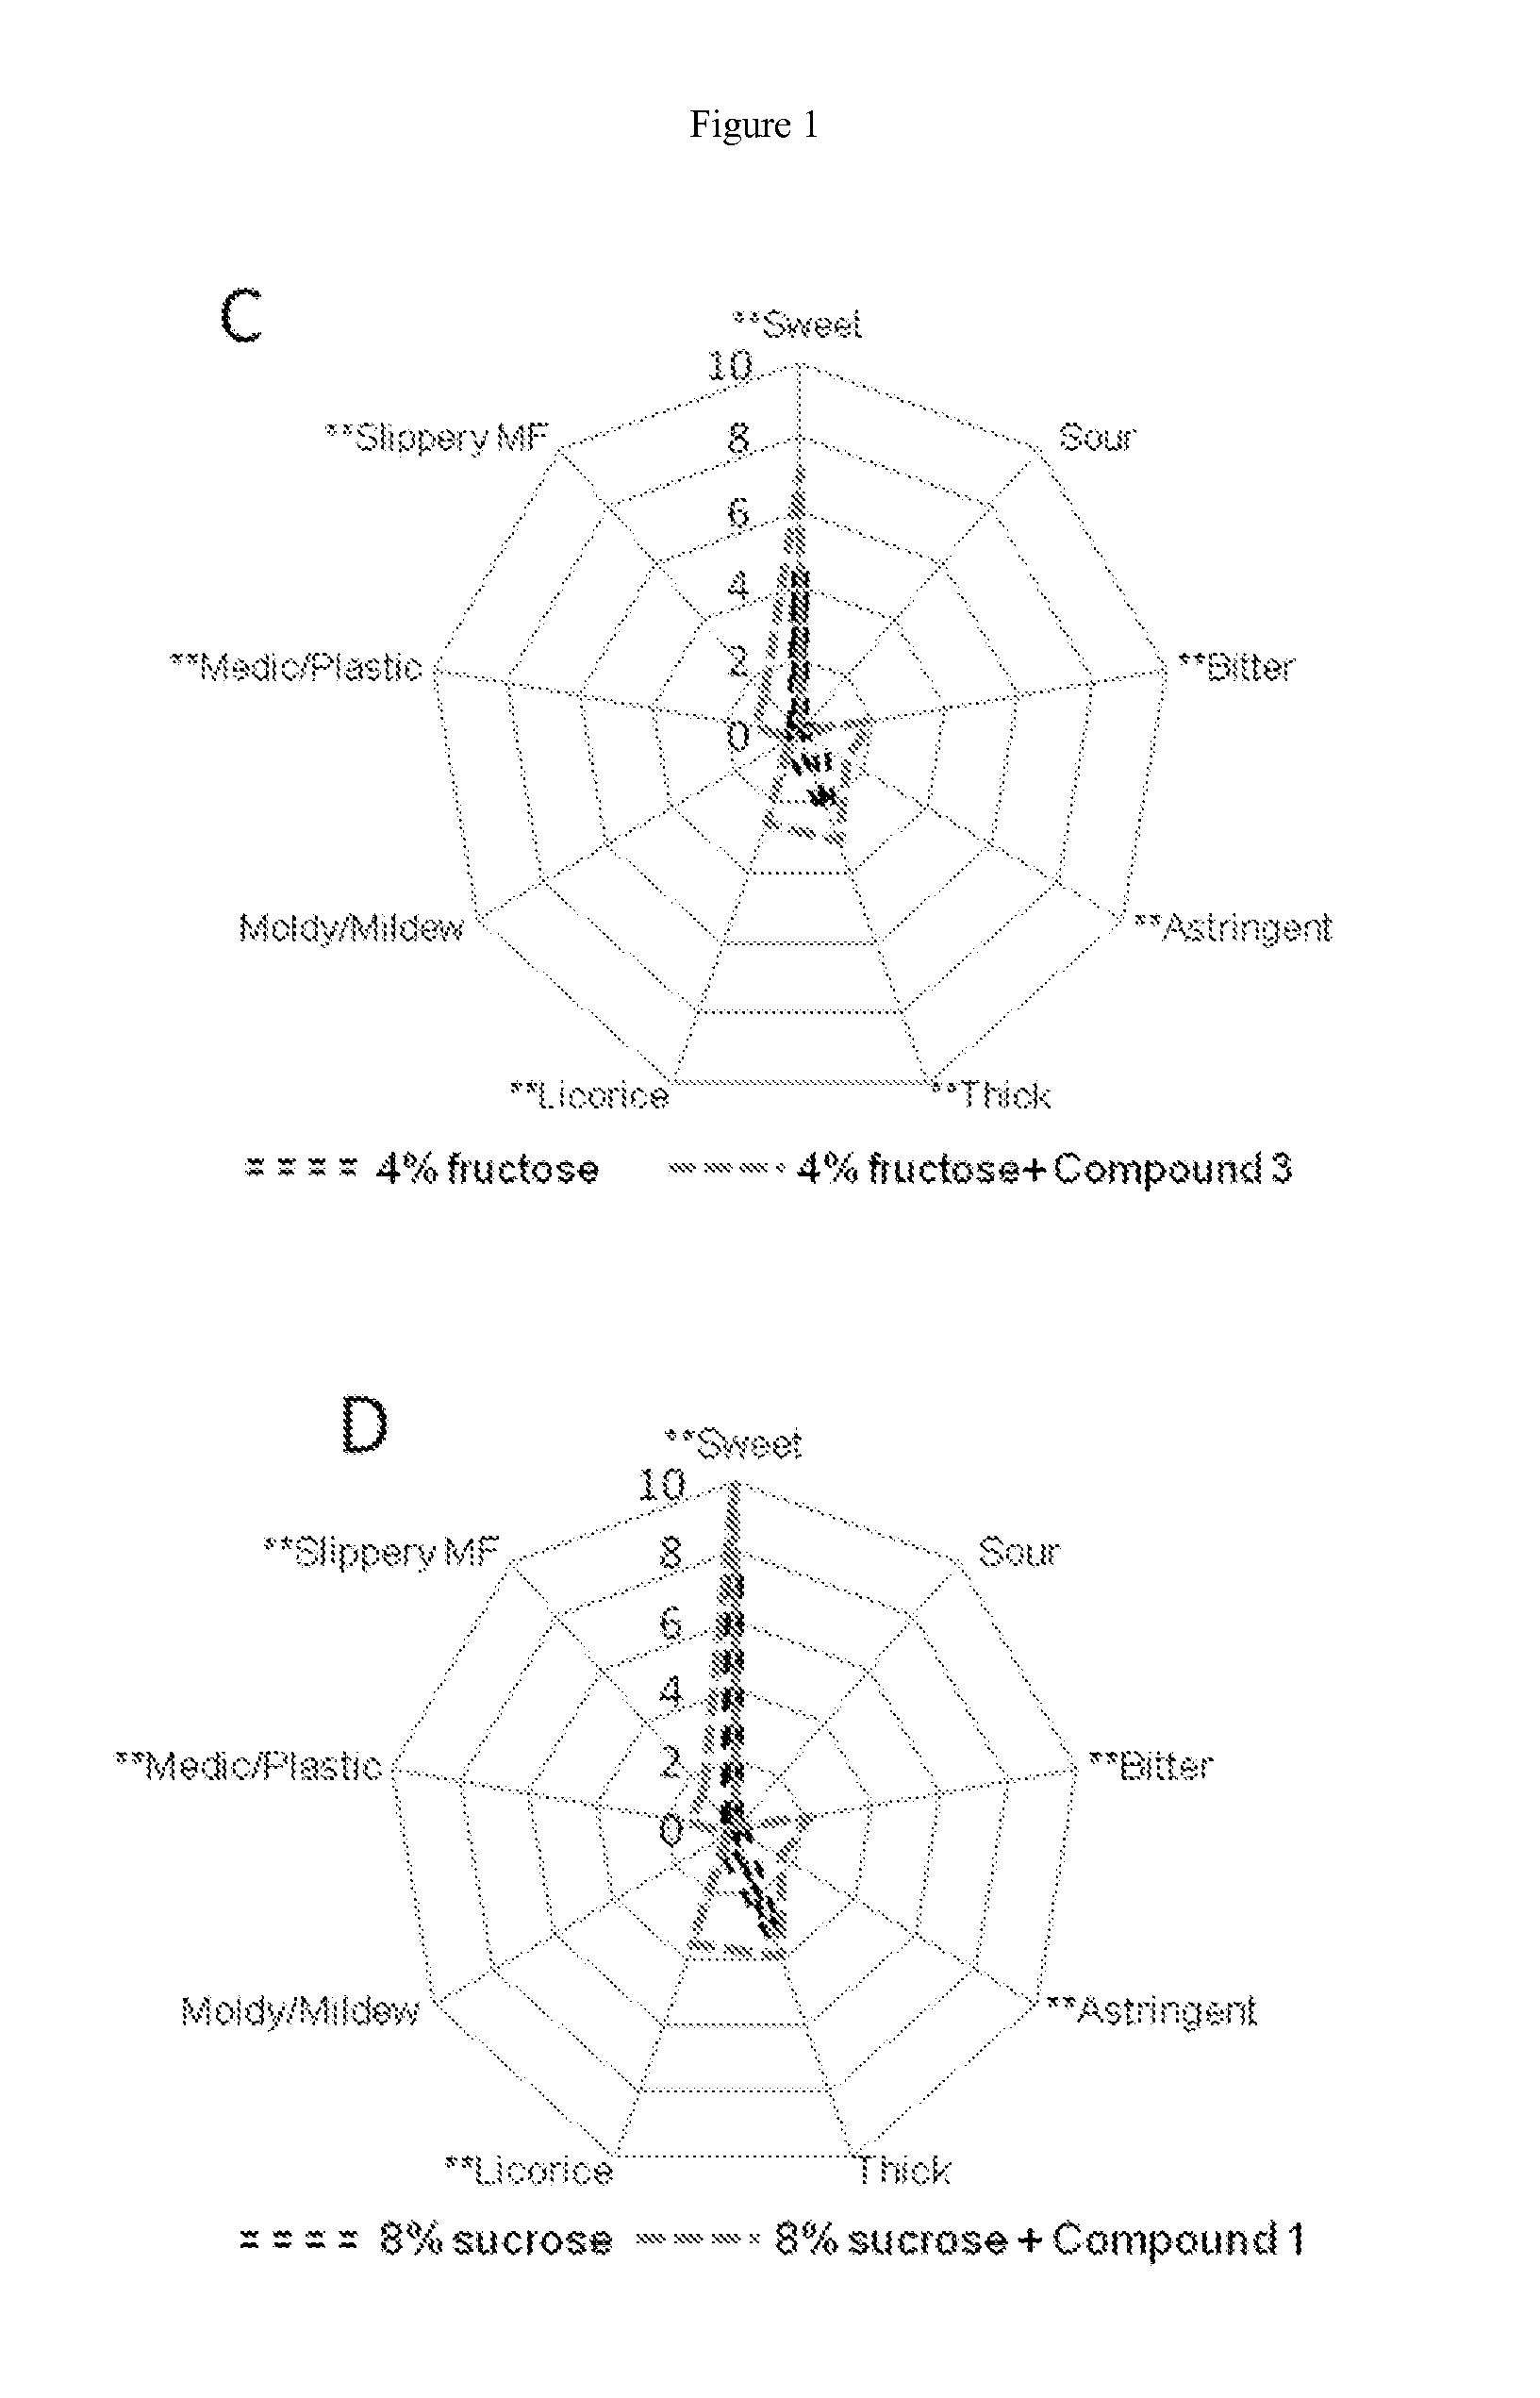 Compounds, compositions, and methods for modulating sweet taste